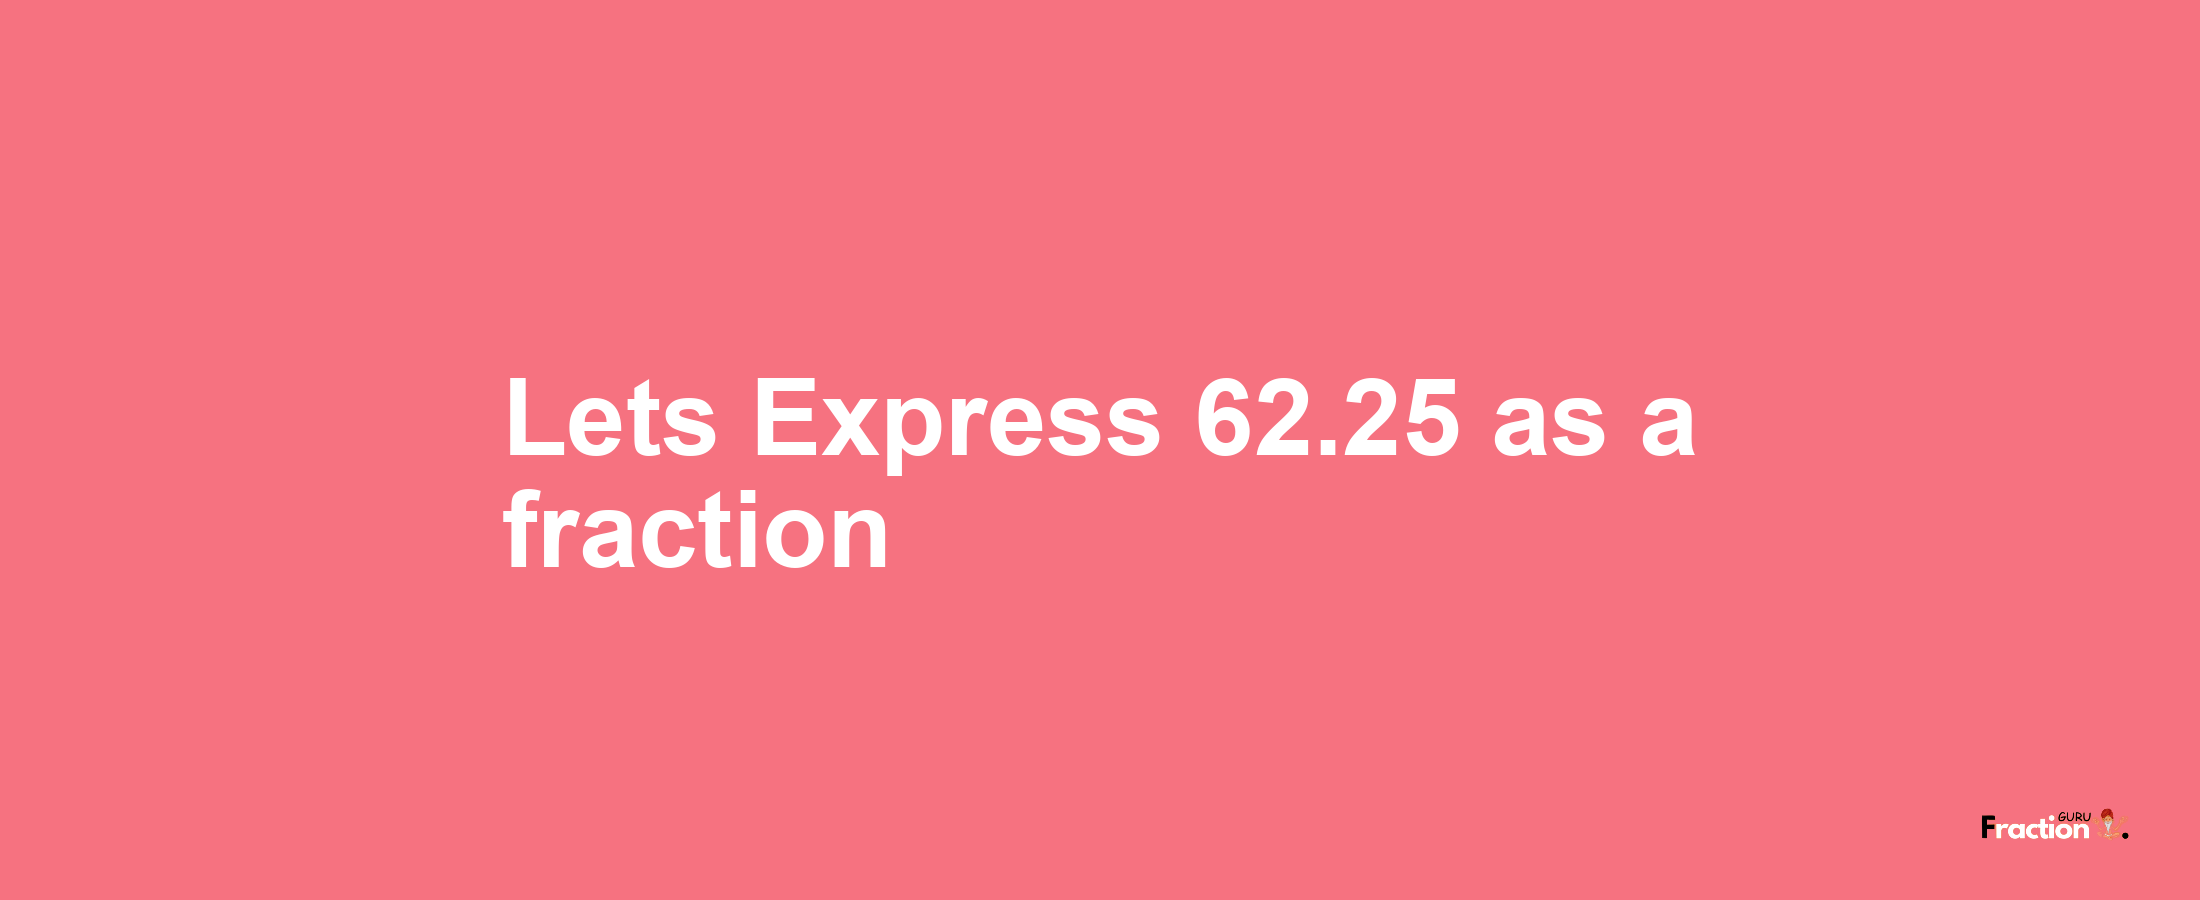 Lets Express 62.25 as afraction